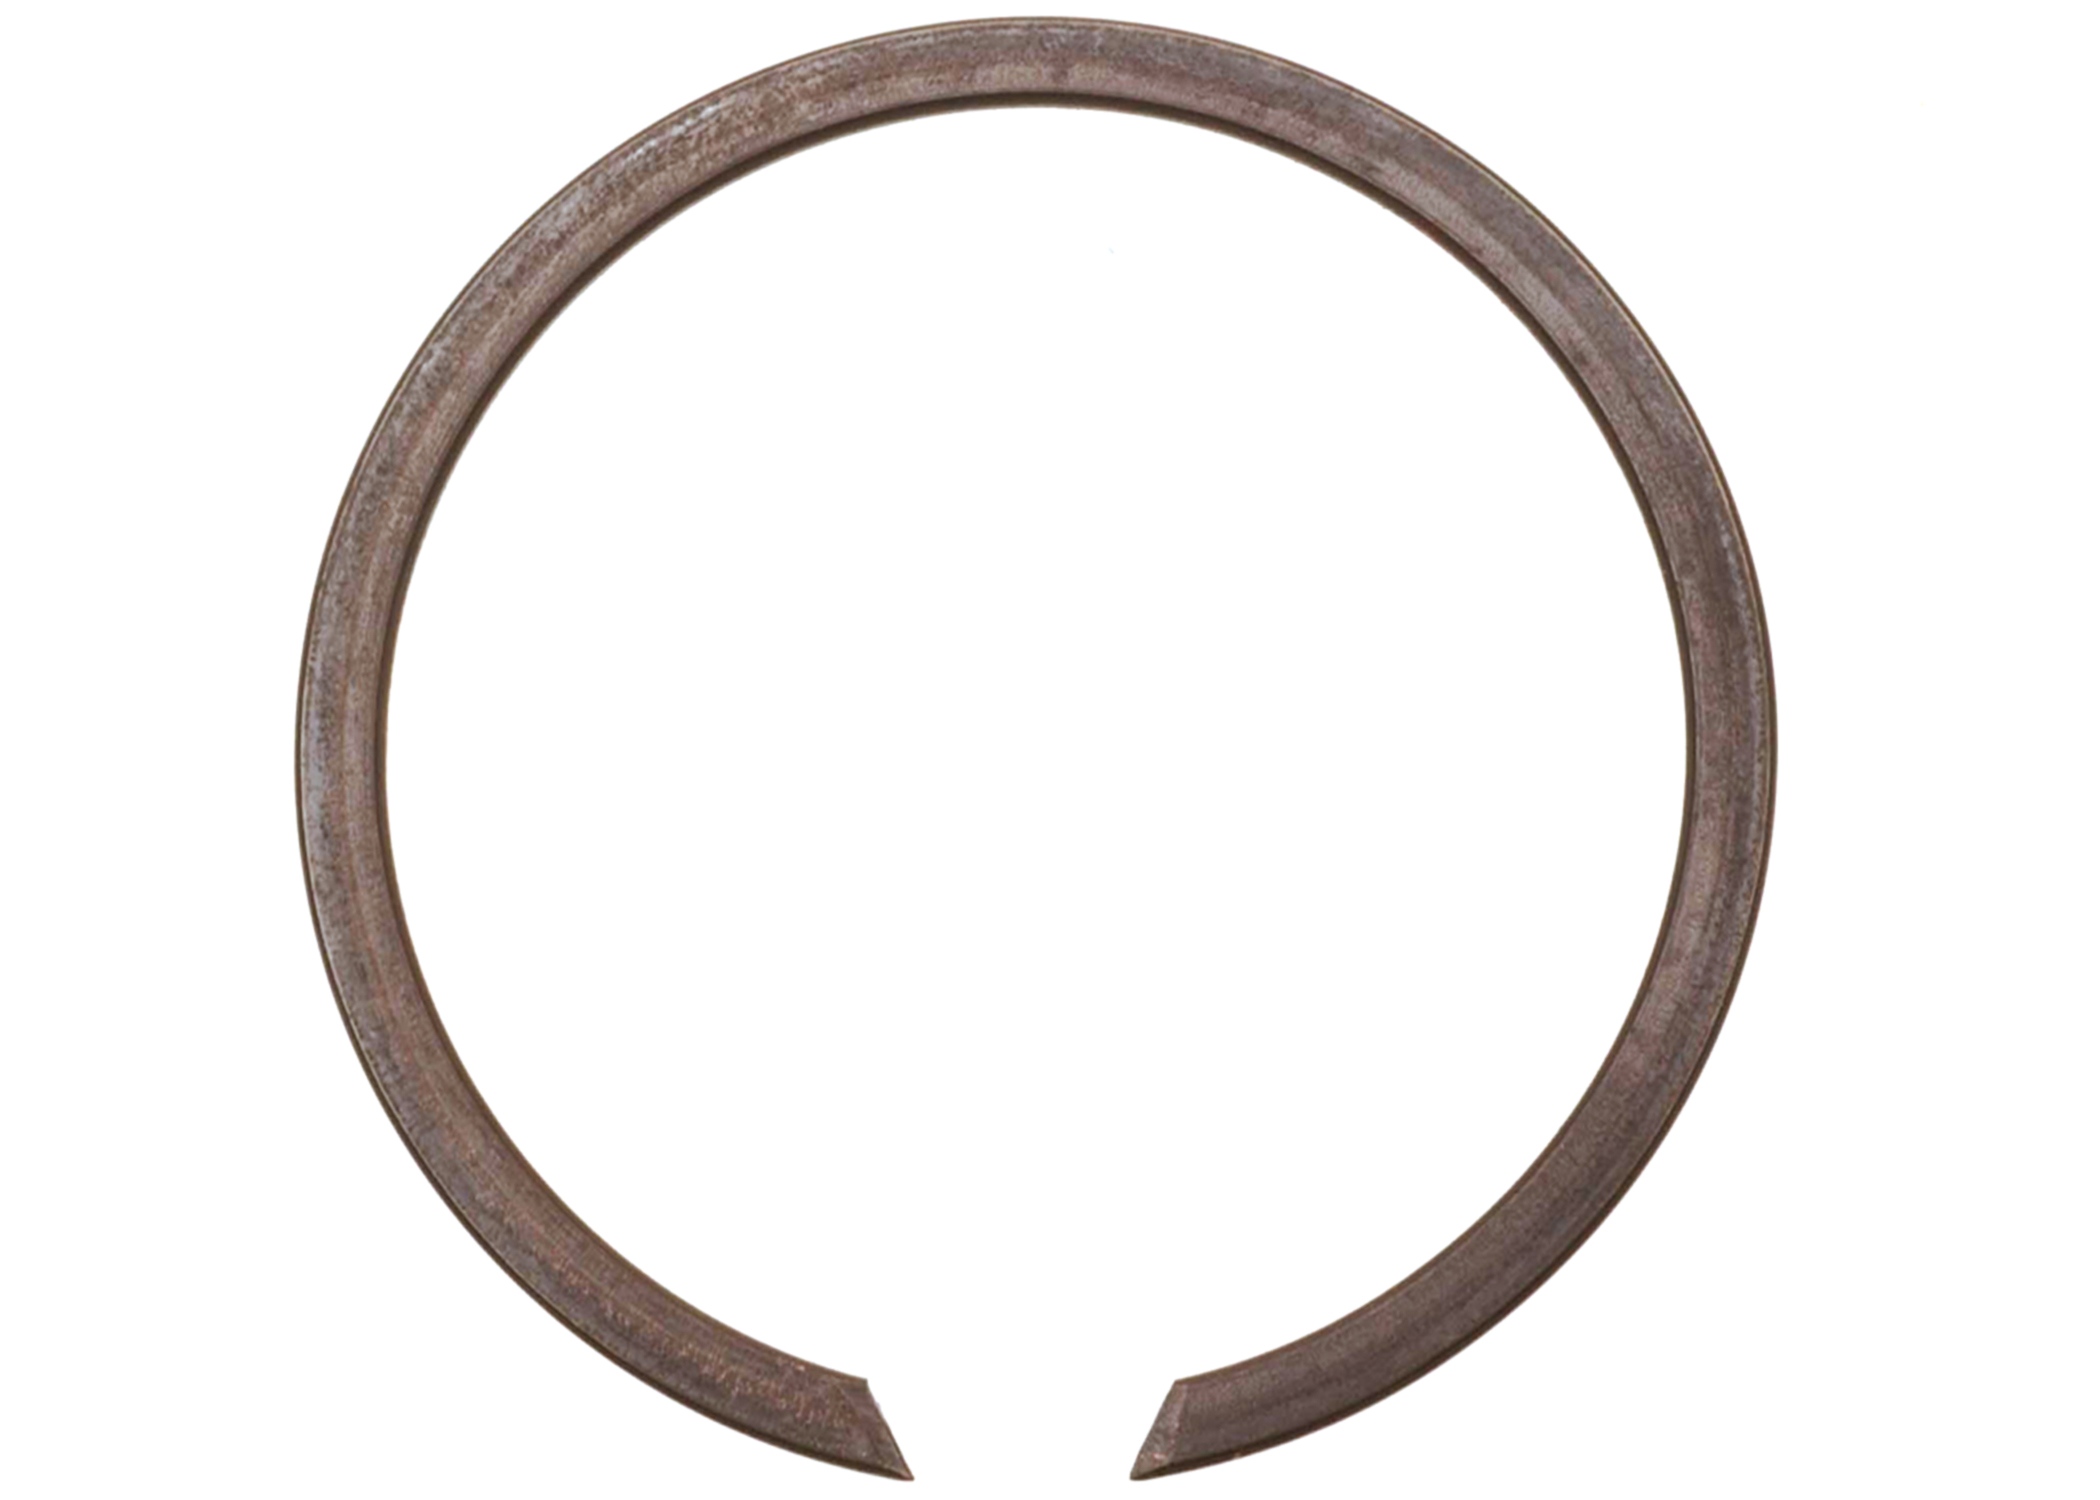 GM GENUINE PARTS - Automatic Transmission Clutch Spring Retaining Ring (Forward) - GMP 8623105